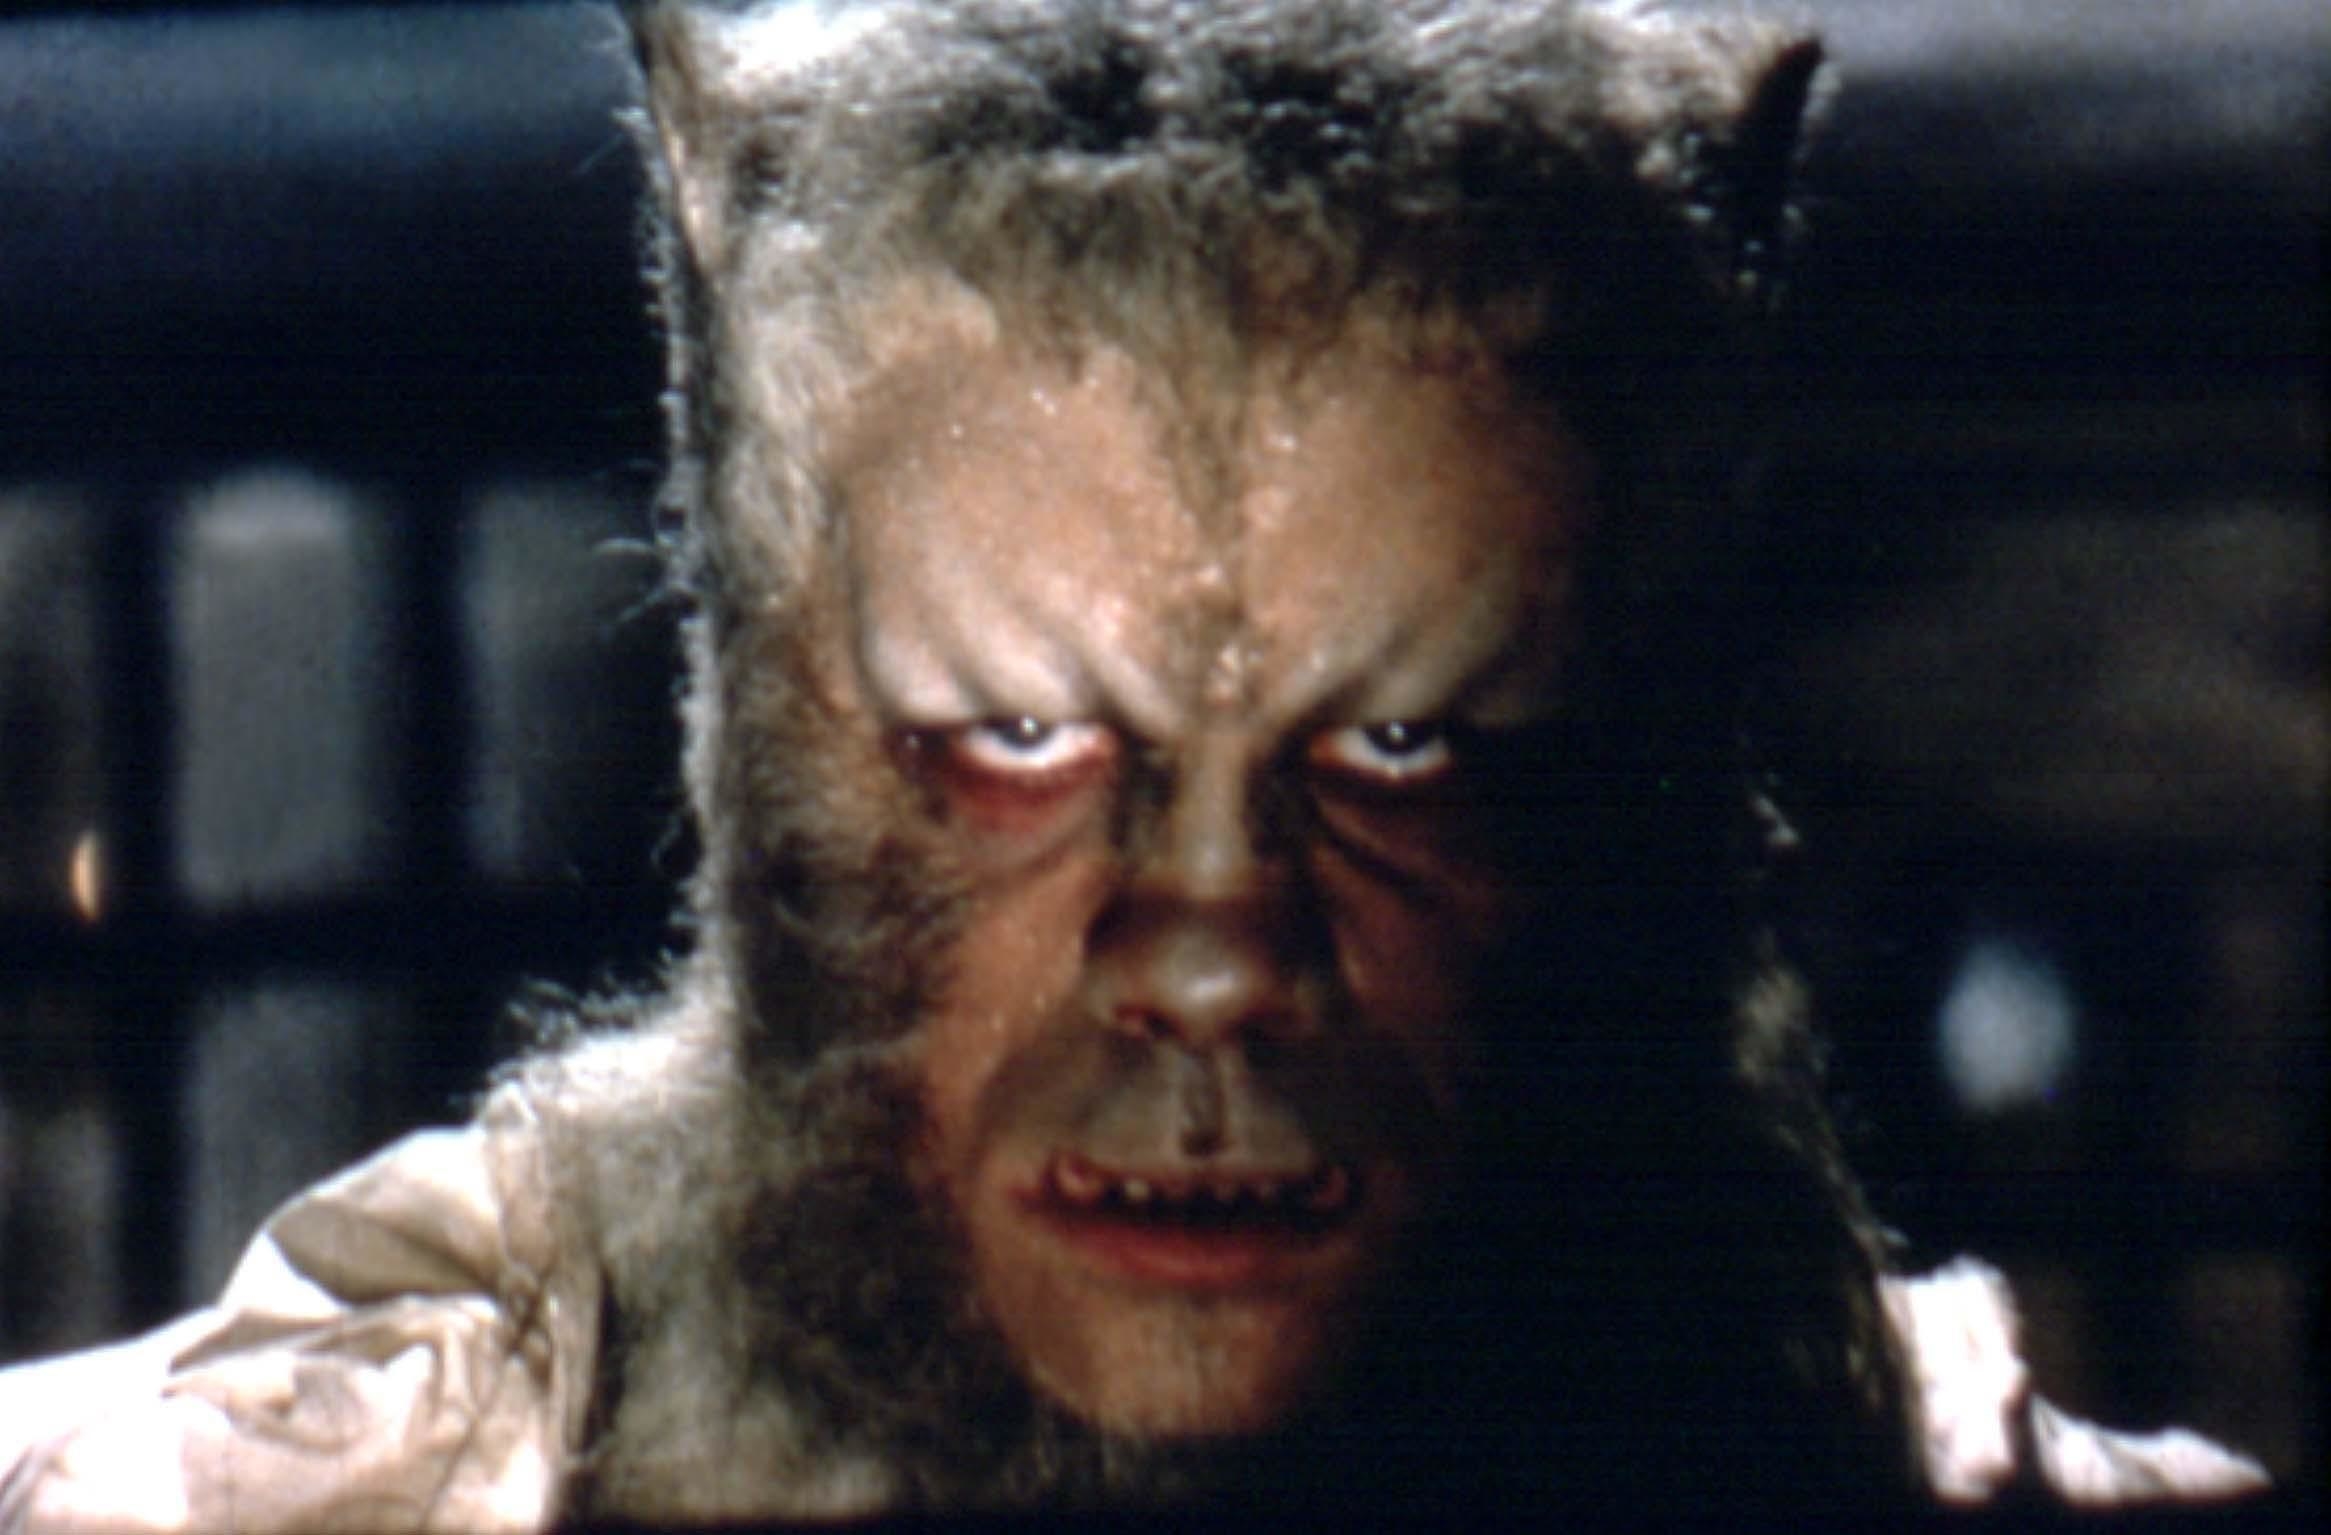 12 Lycanthrope Movies With The Best and Most Inventive Werewolves